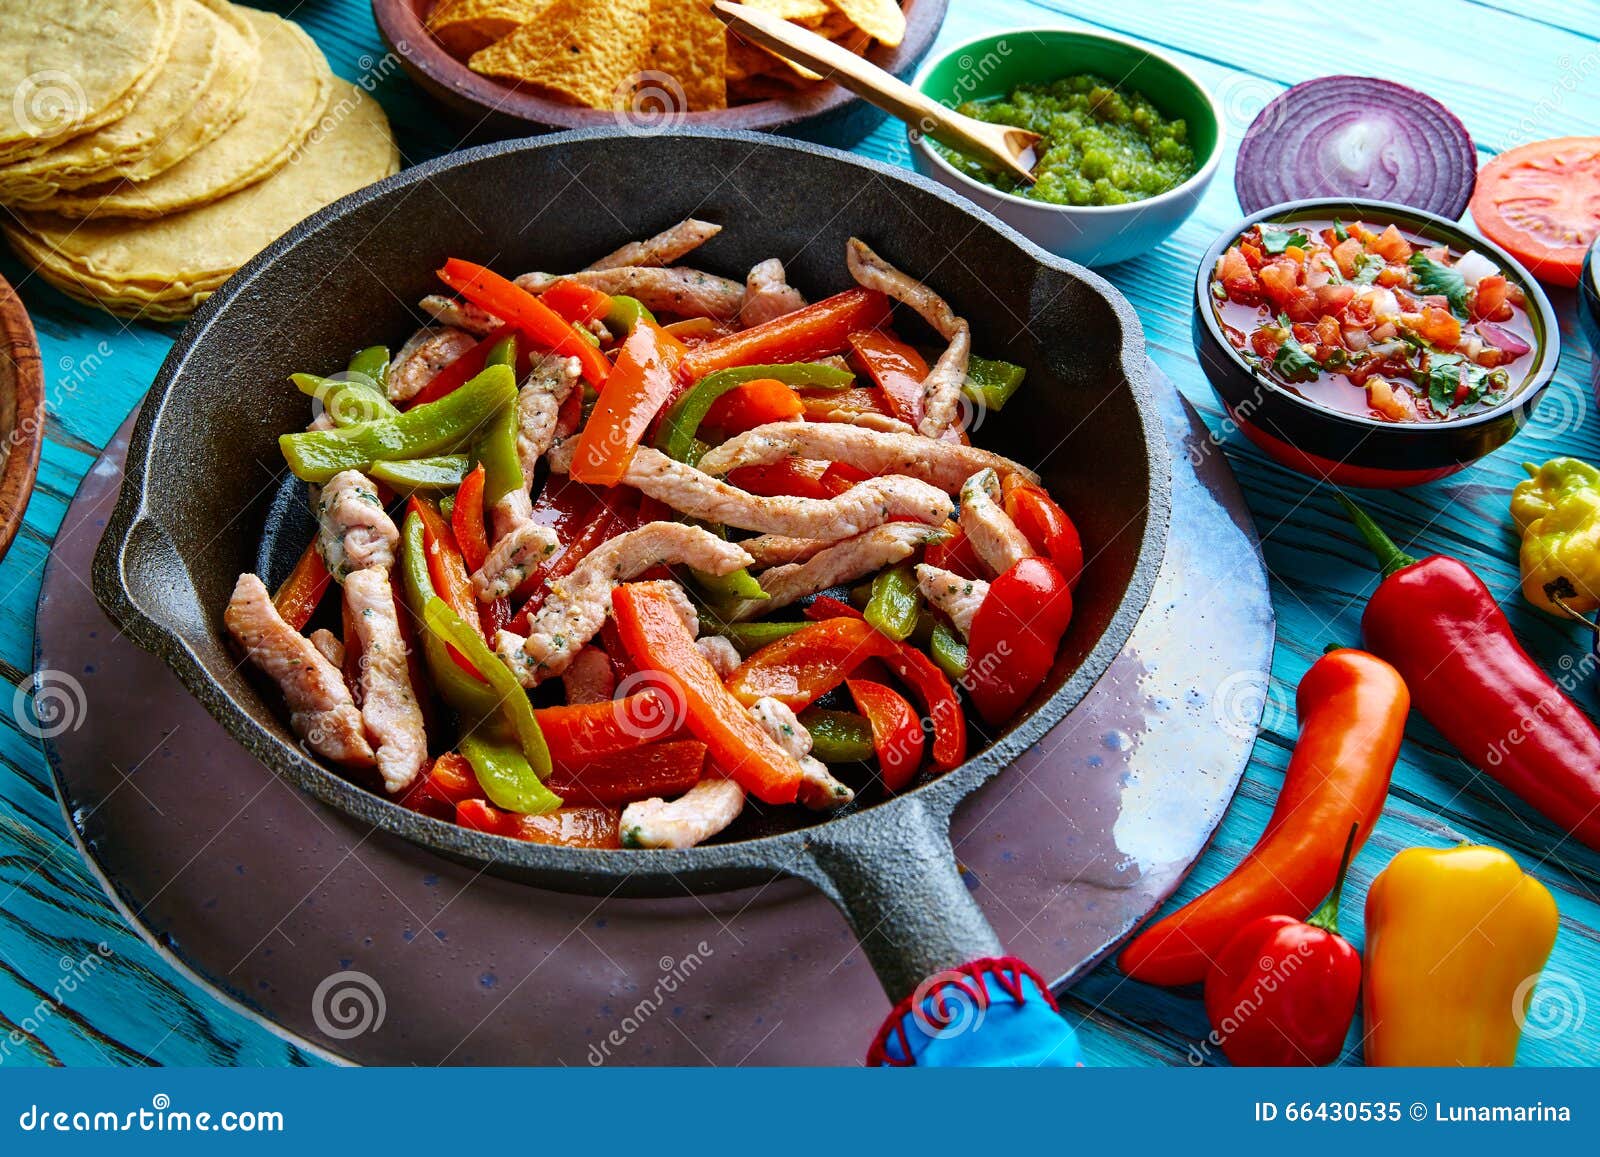 chicken fajitas in a pan chili and sides mexican